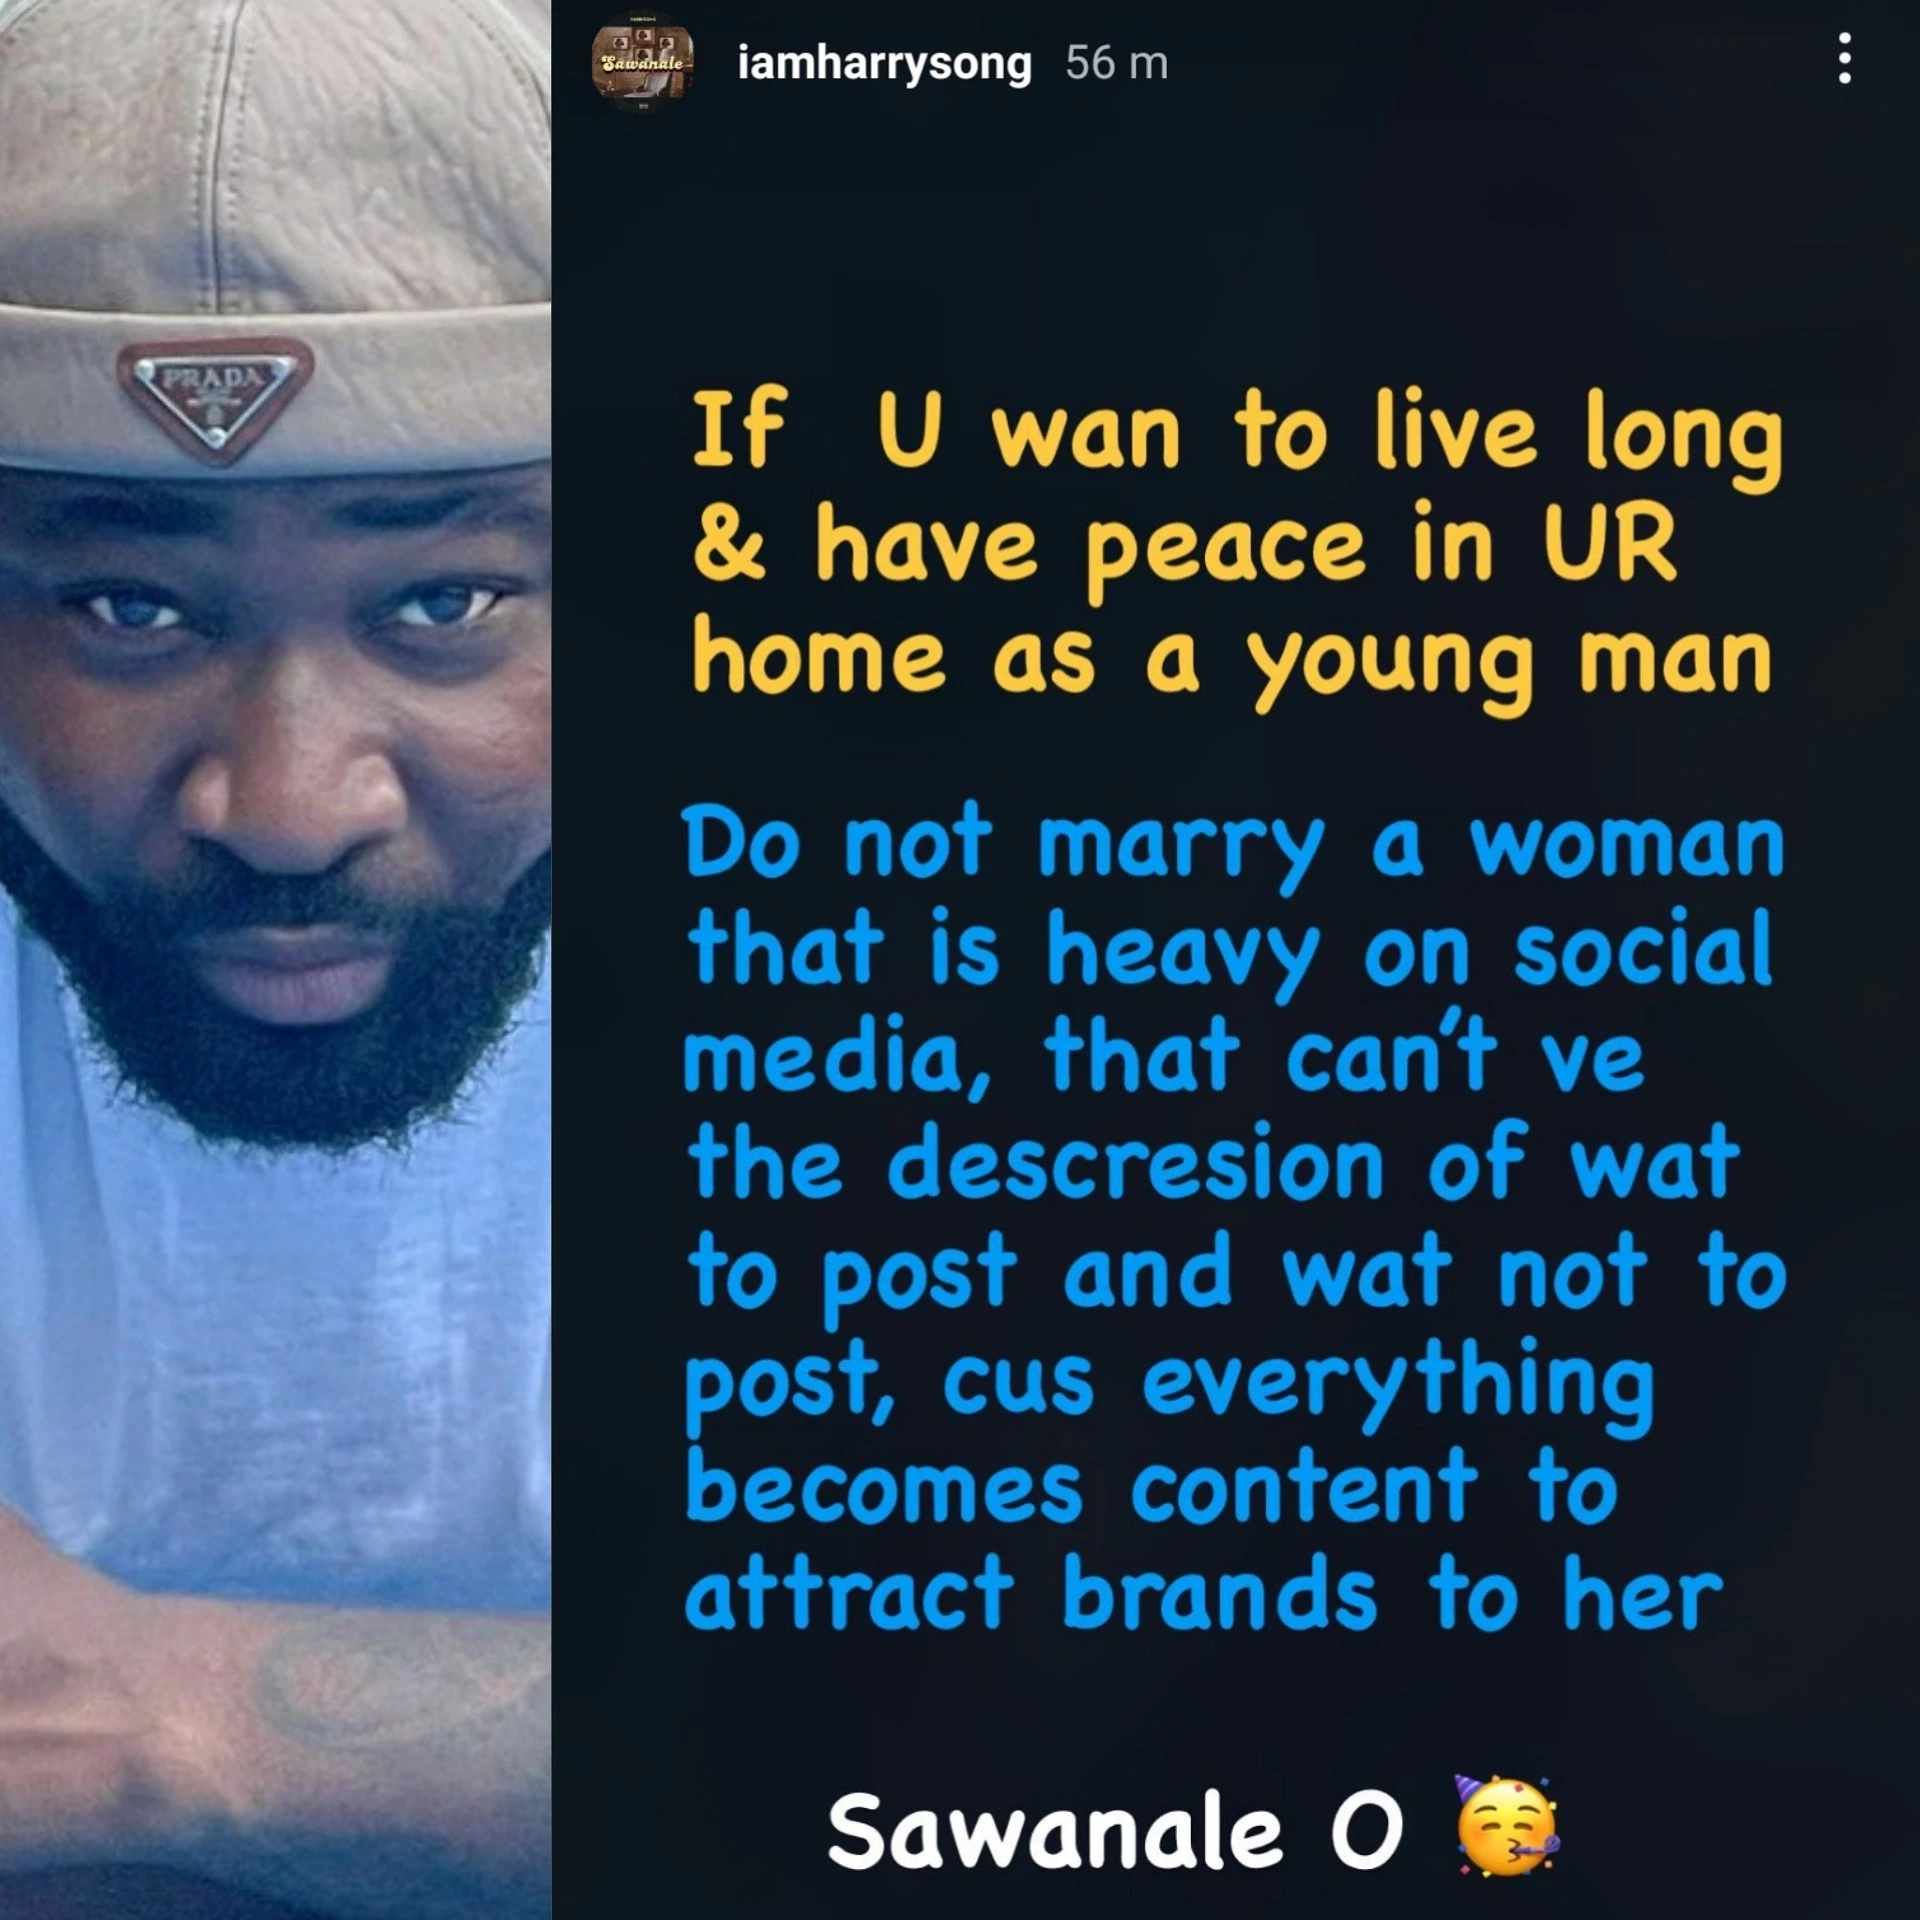 annieidibia 2face do not marry a woman that is heavy on social media singer harrysong advises young men